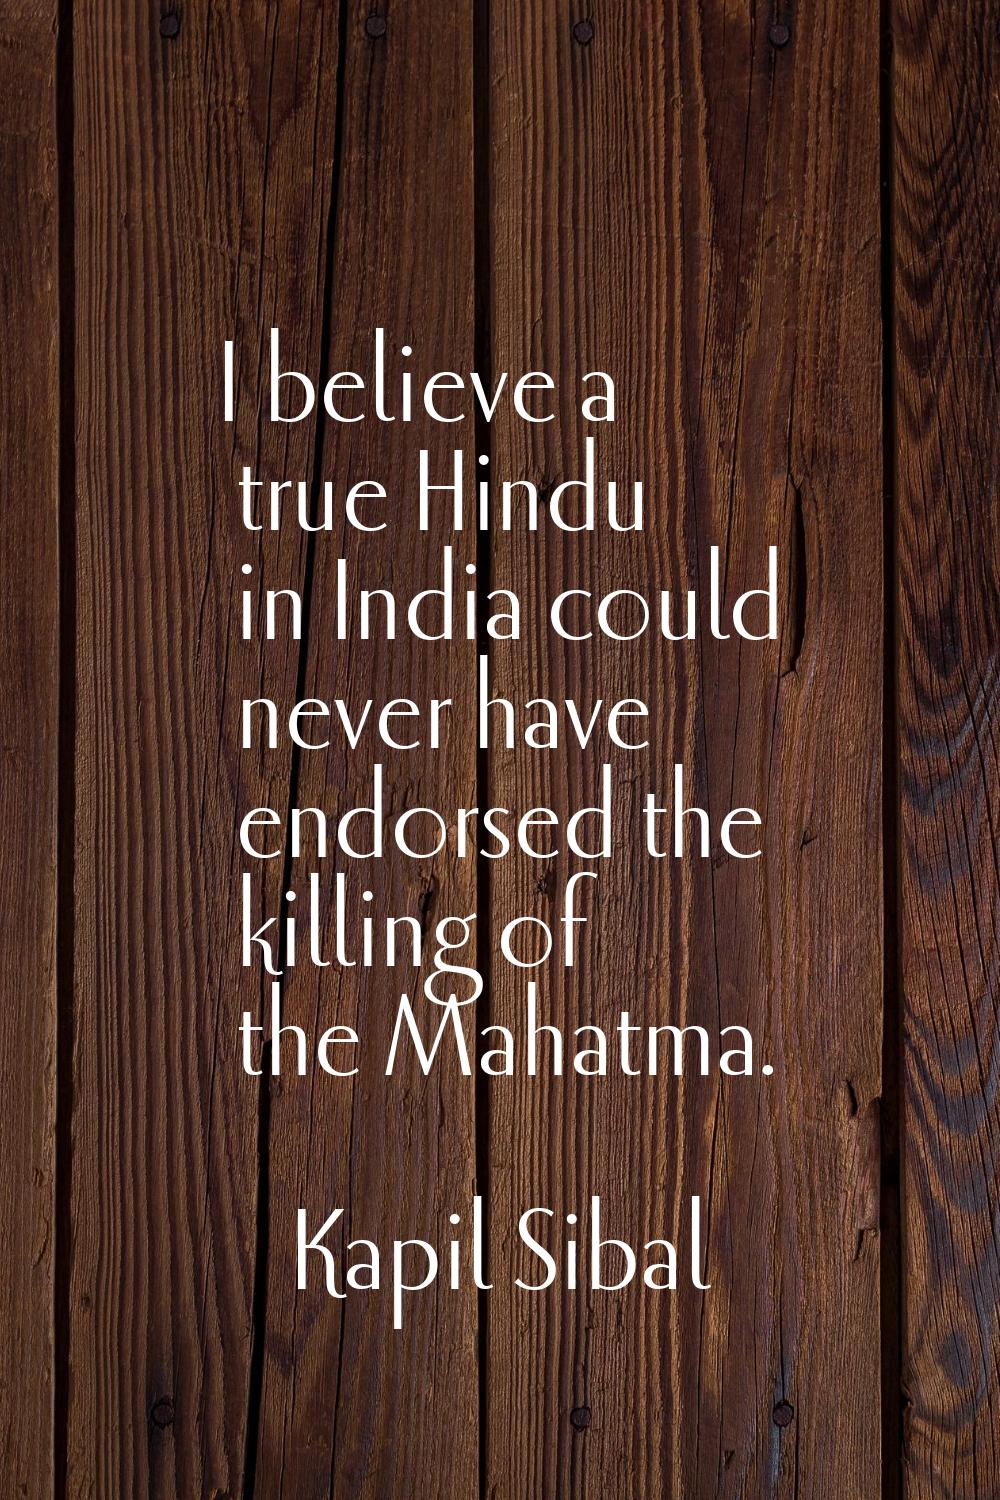 I believe a true Hindu in India could never have endorsed the killing of the Mahatma.